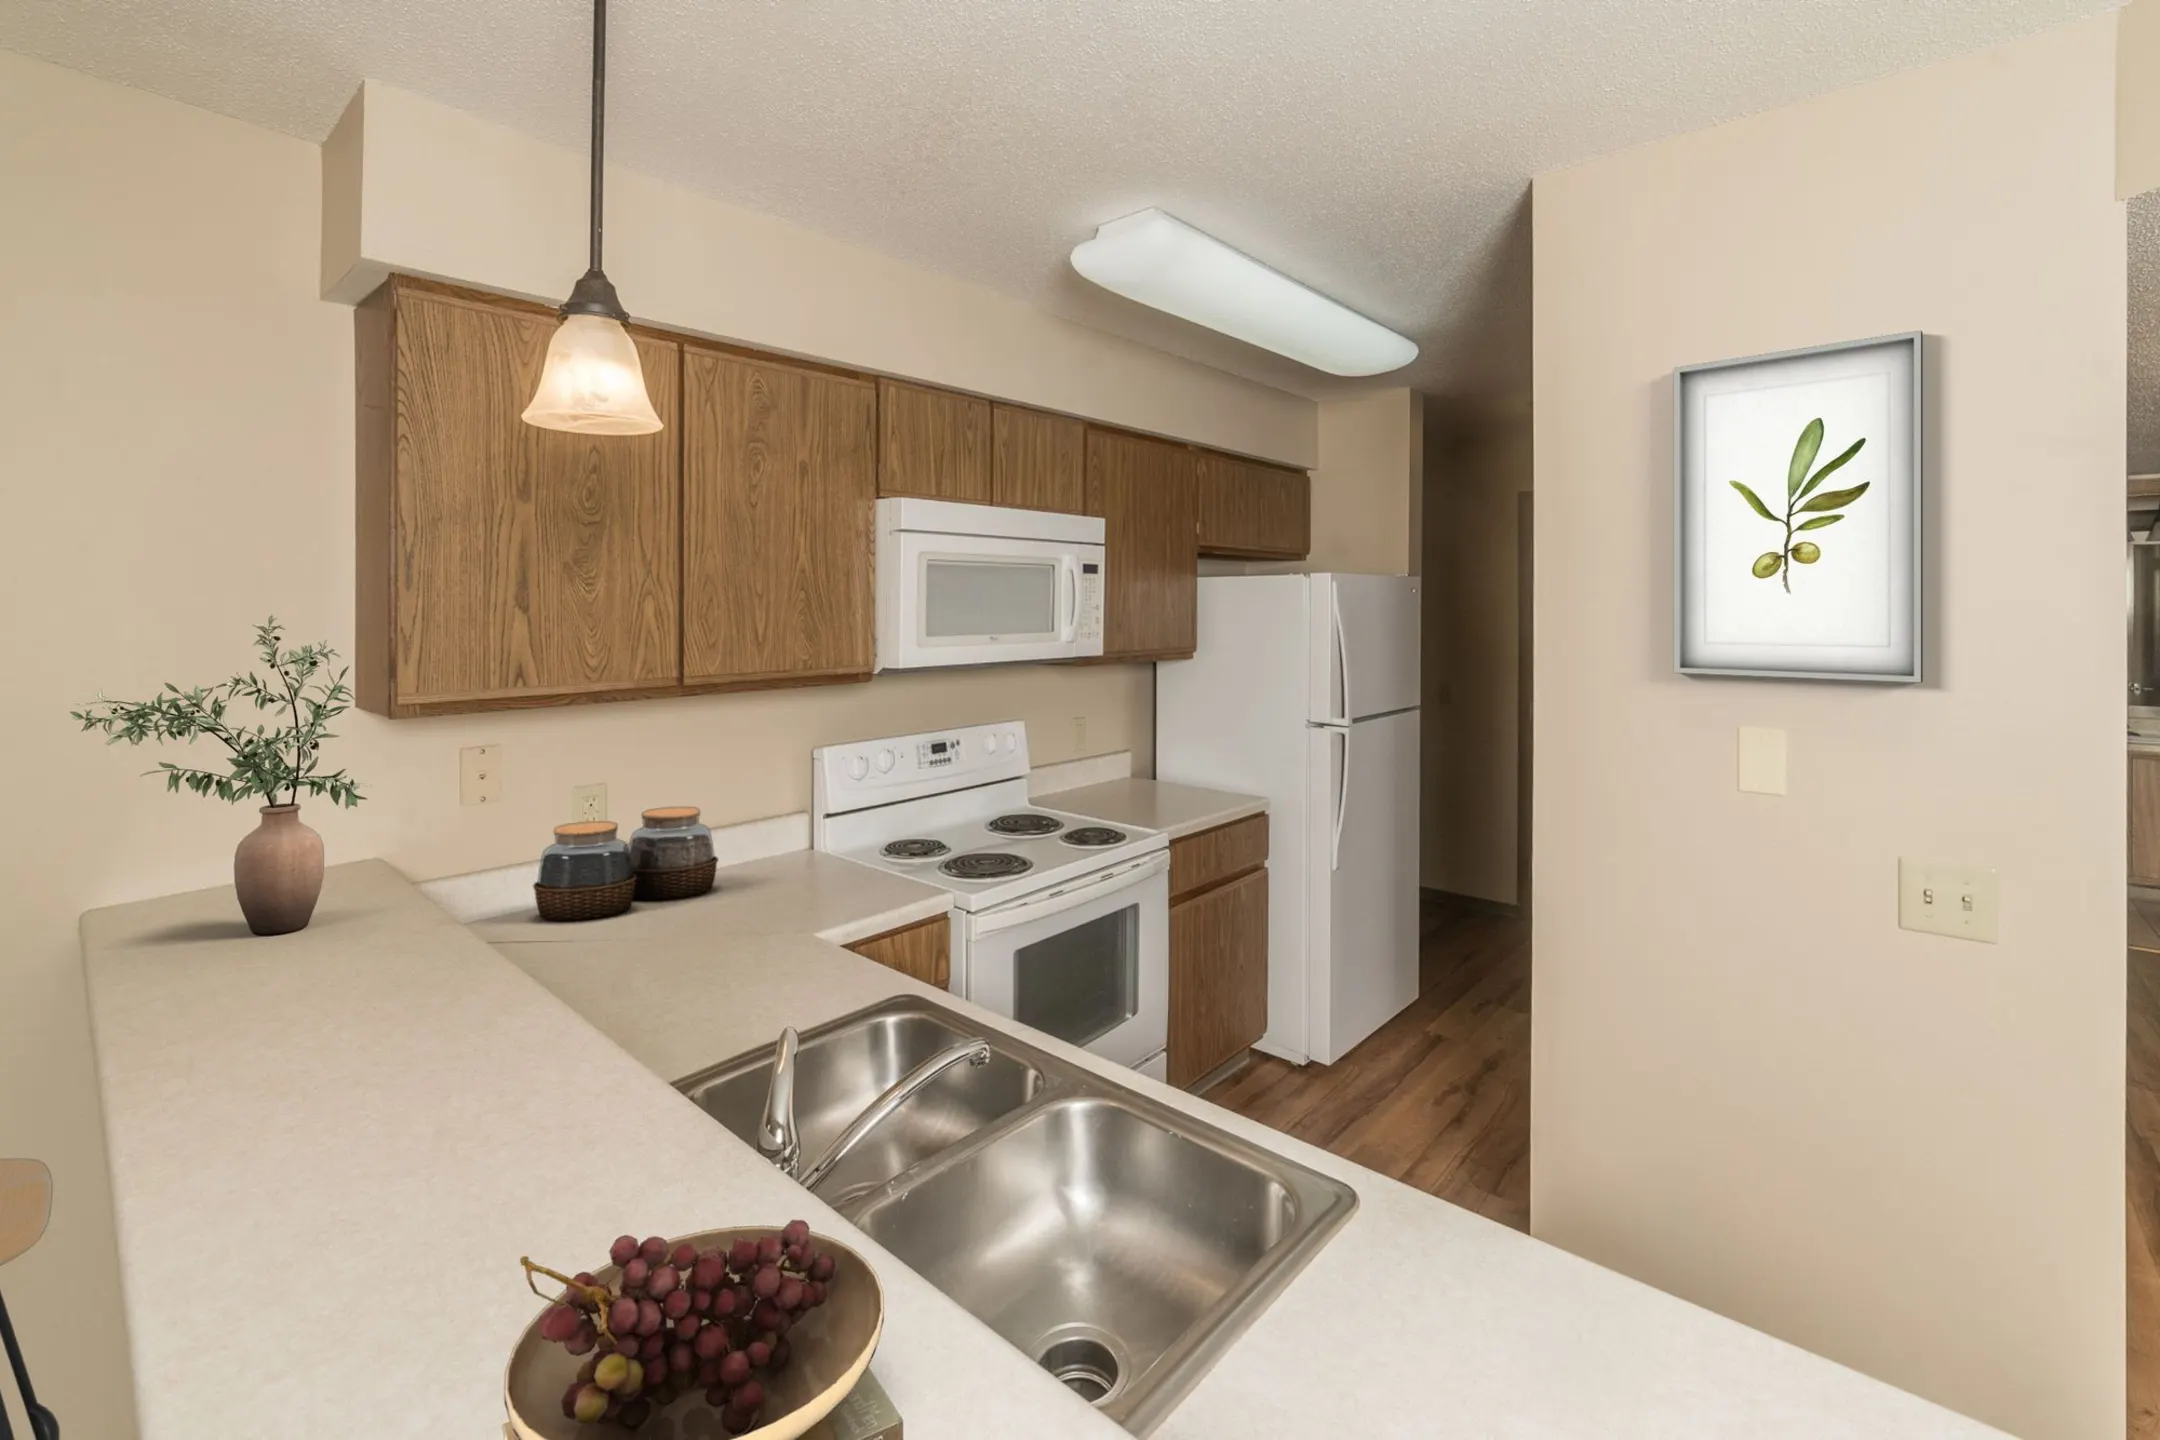 Kitchen - Beadle West - Sioux Falls, SD